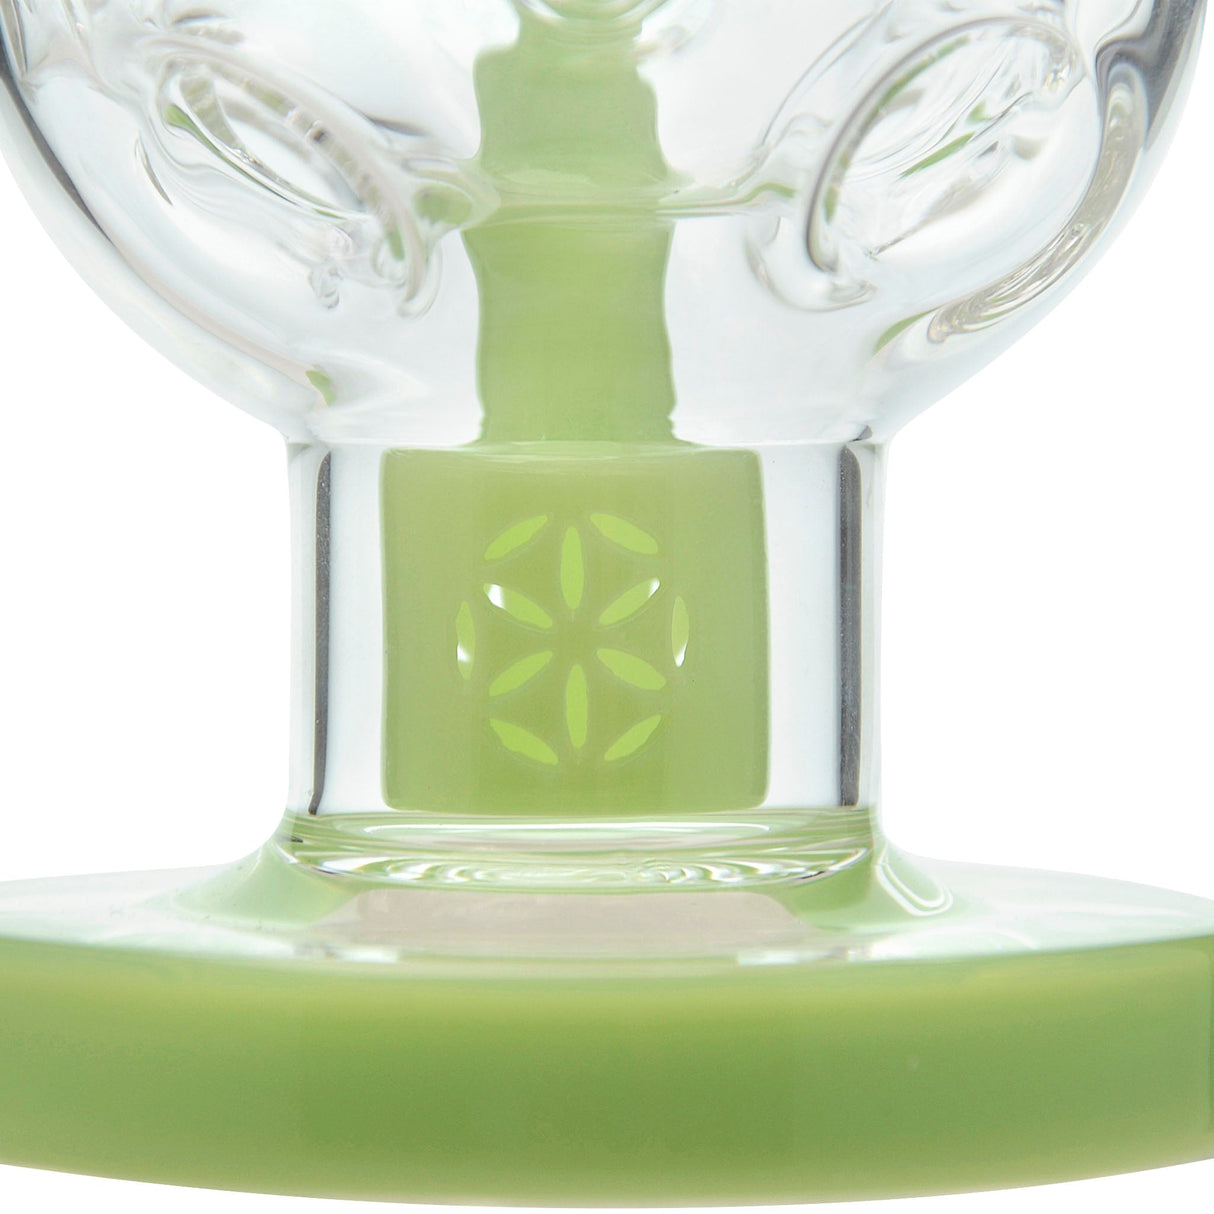 Close-up of Calibear Fab Egg Seed Of Life Dab Rig with green color accents and borosilicate glass